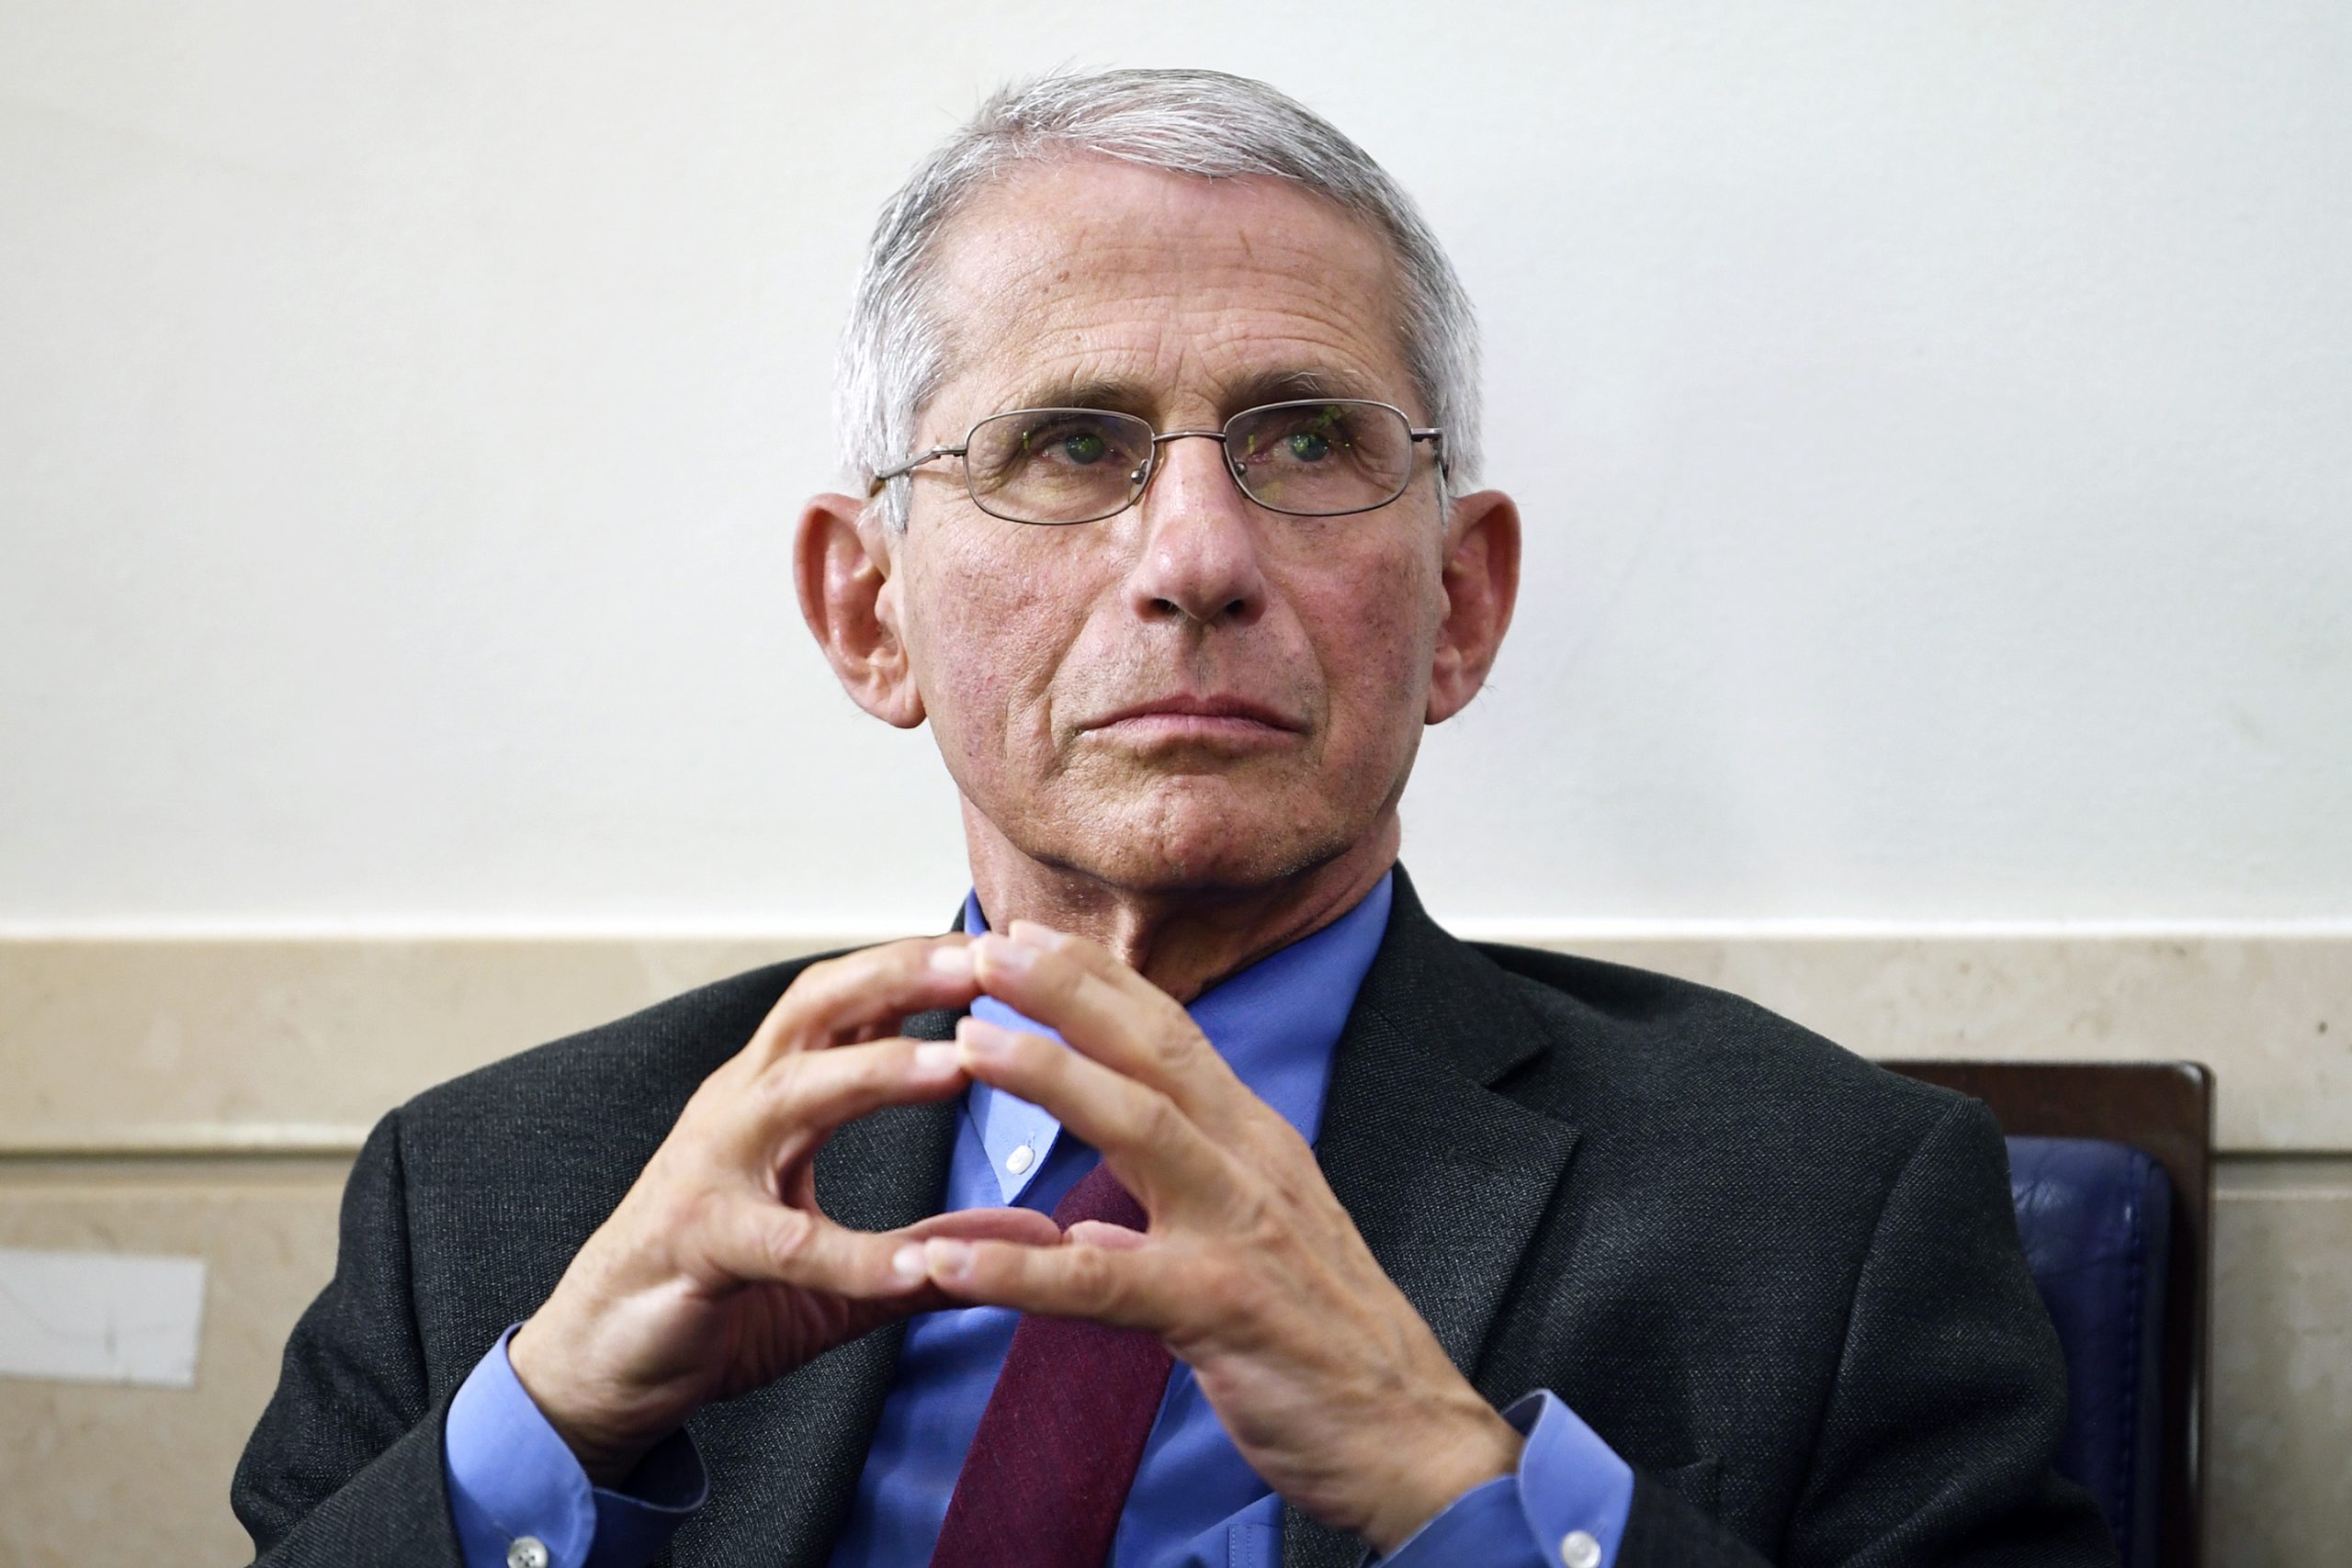 Fauci in a press briefing